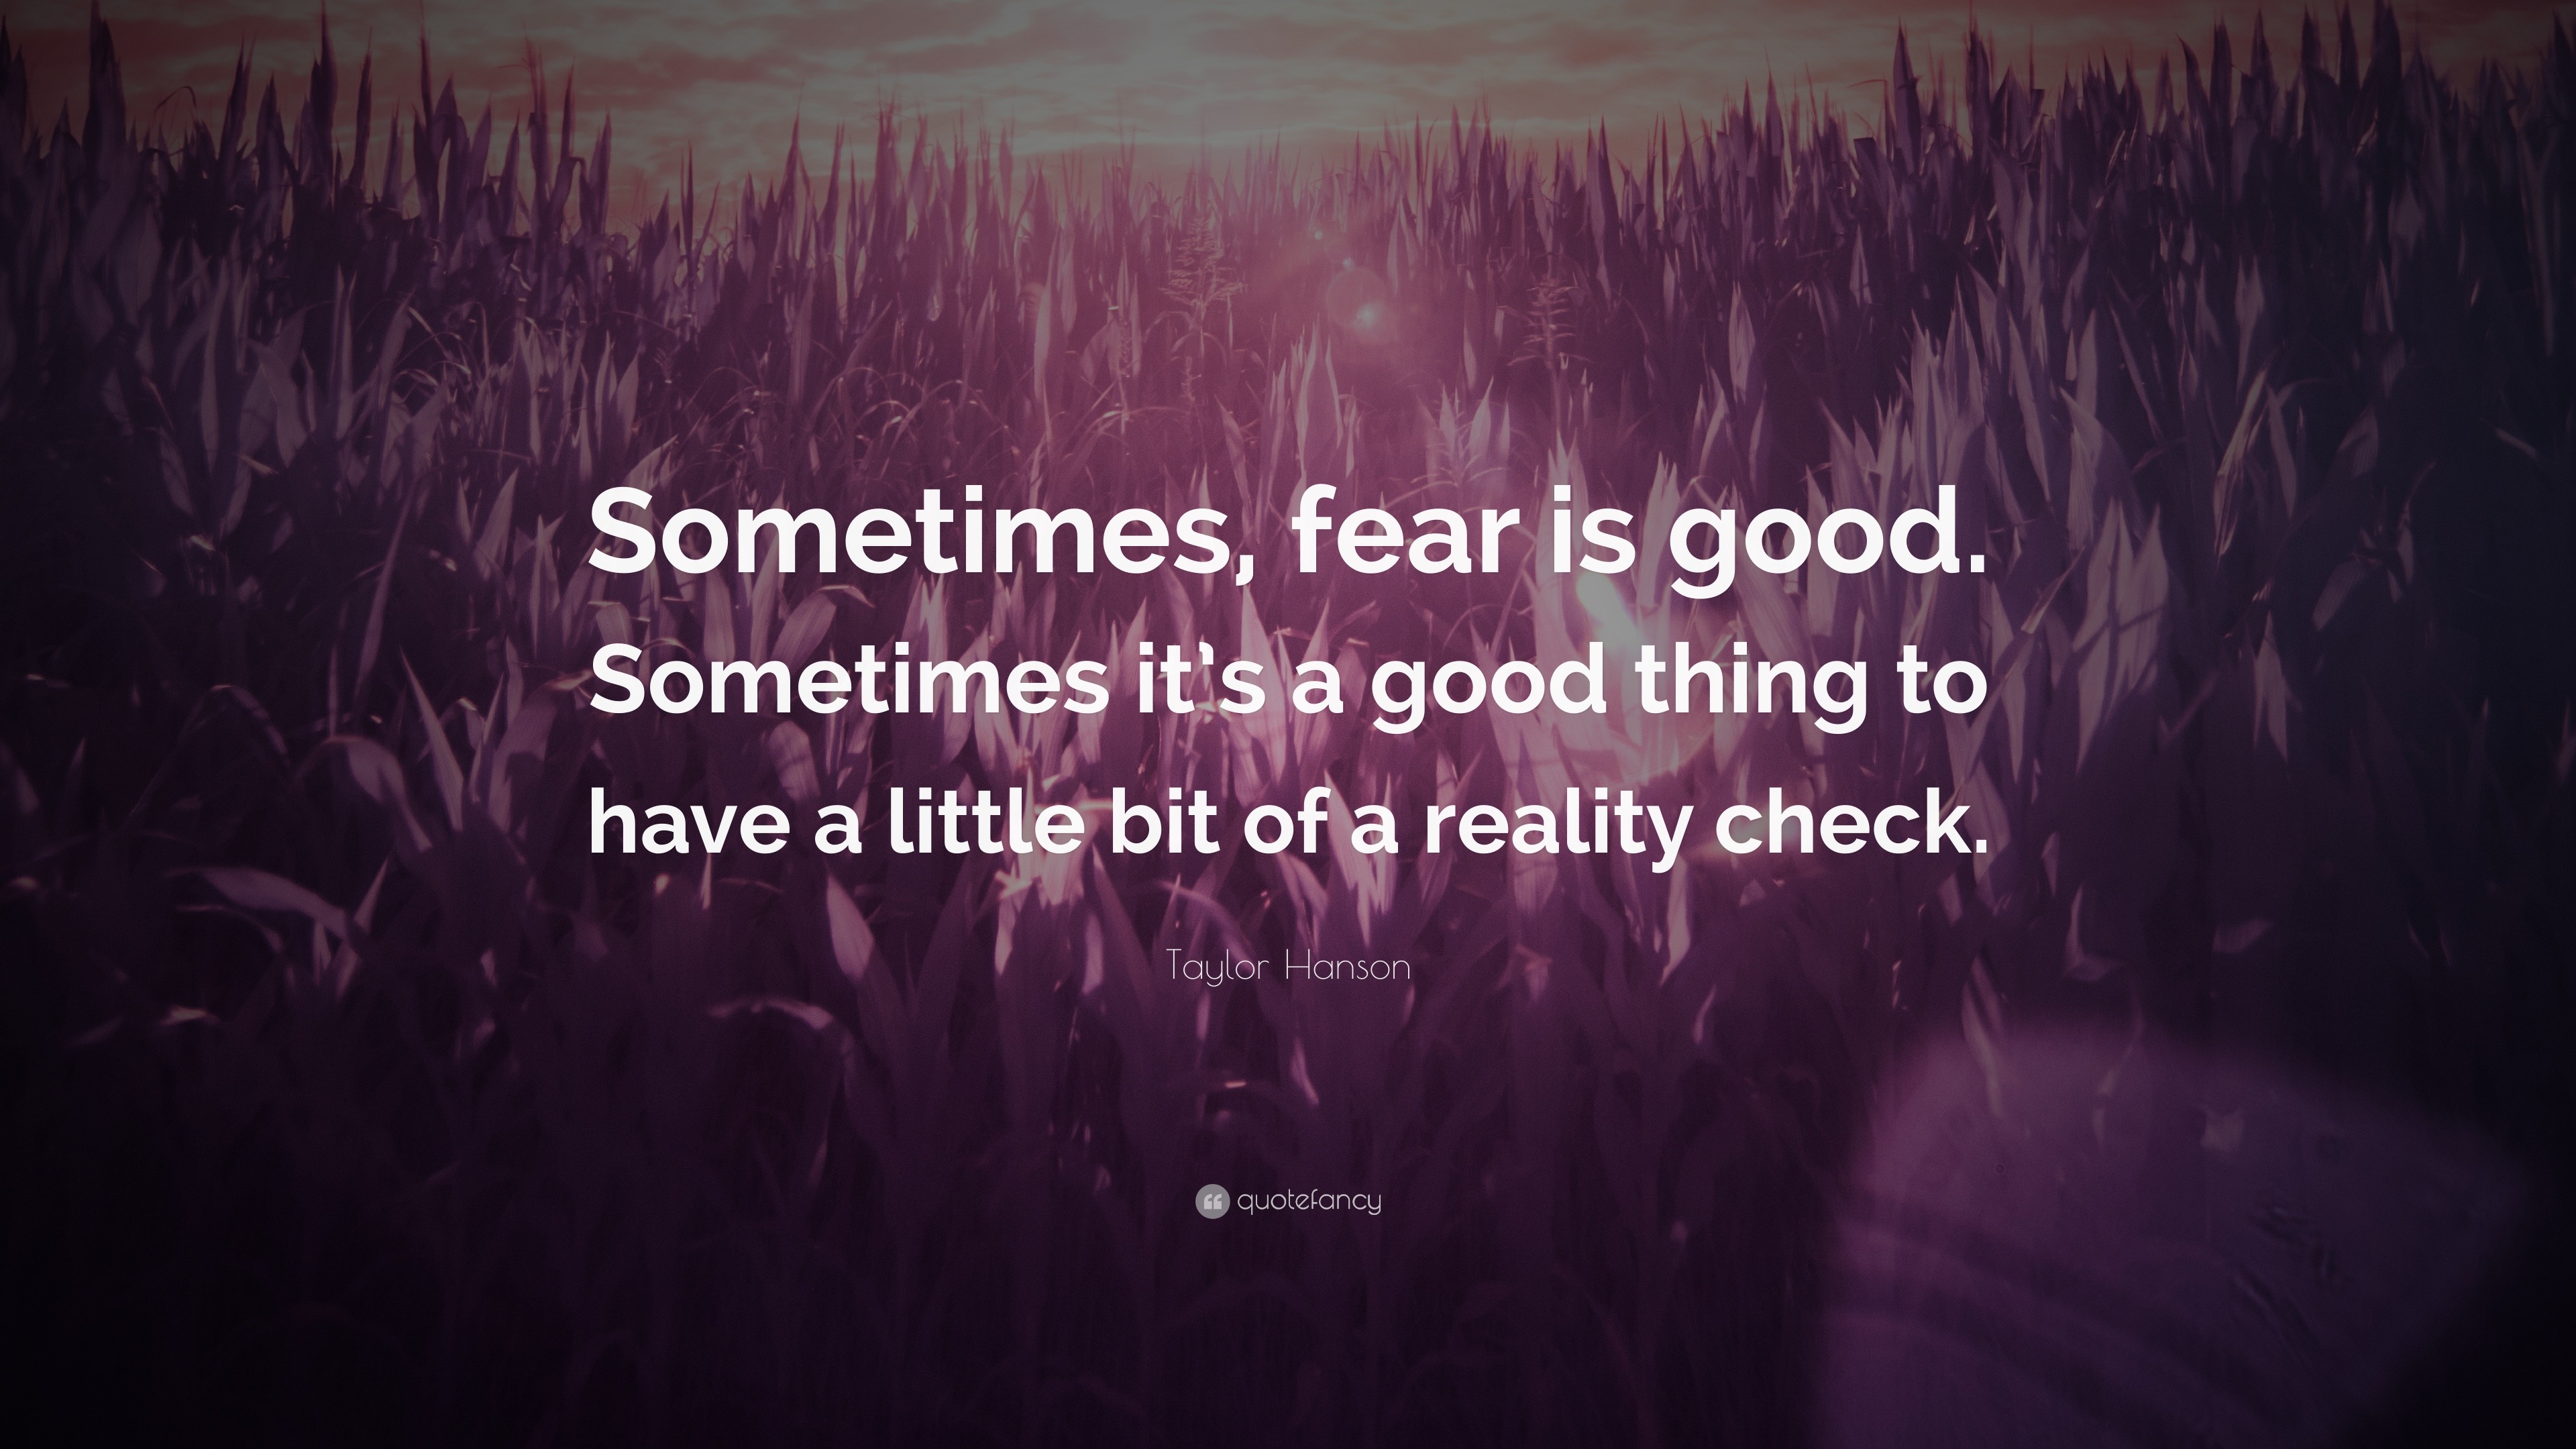 Taylor Hanson Quote “Sometimes, fear is good. Sometimes